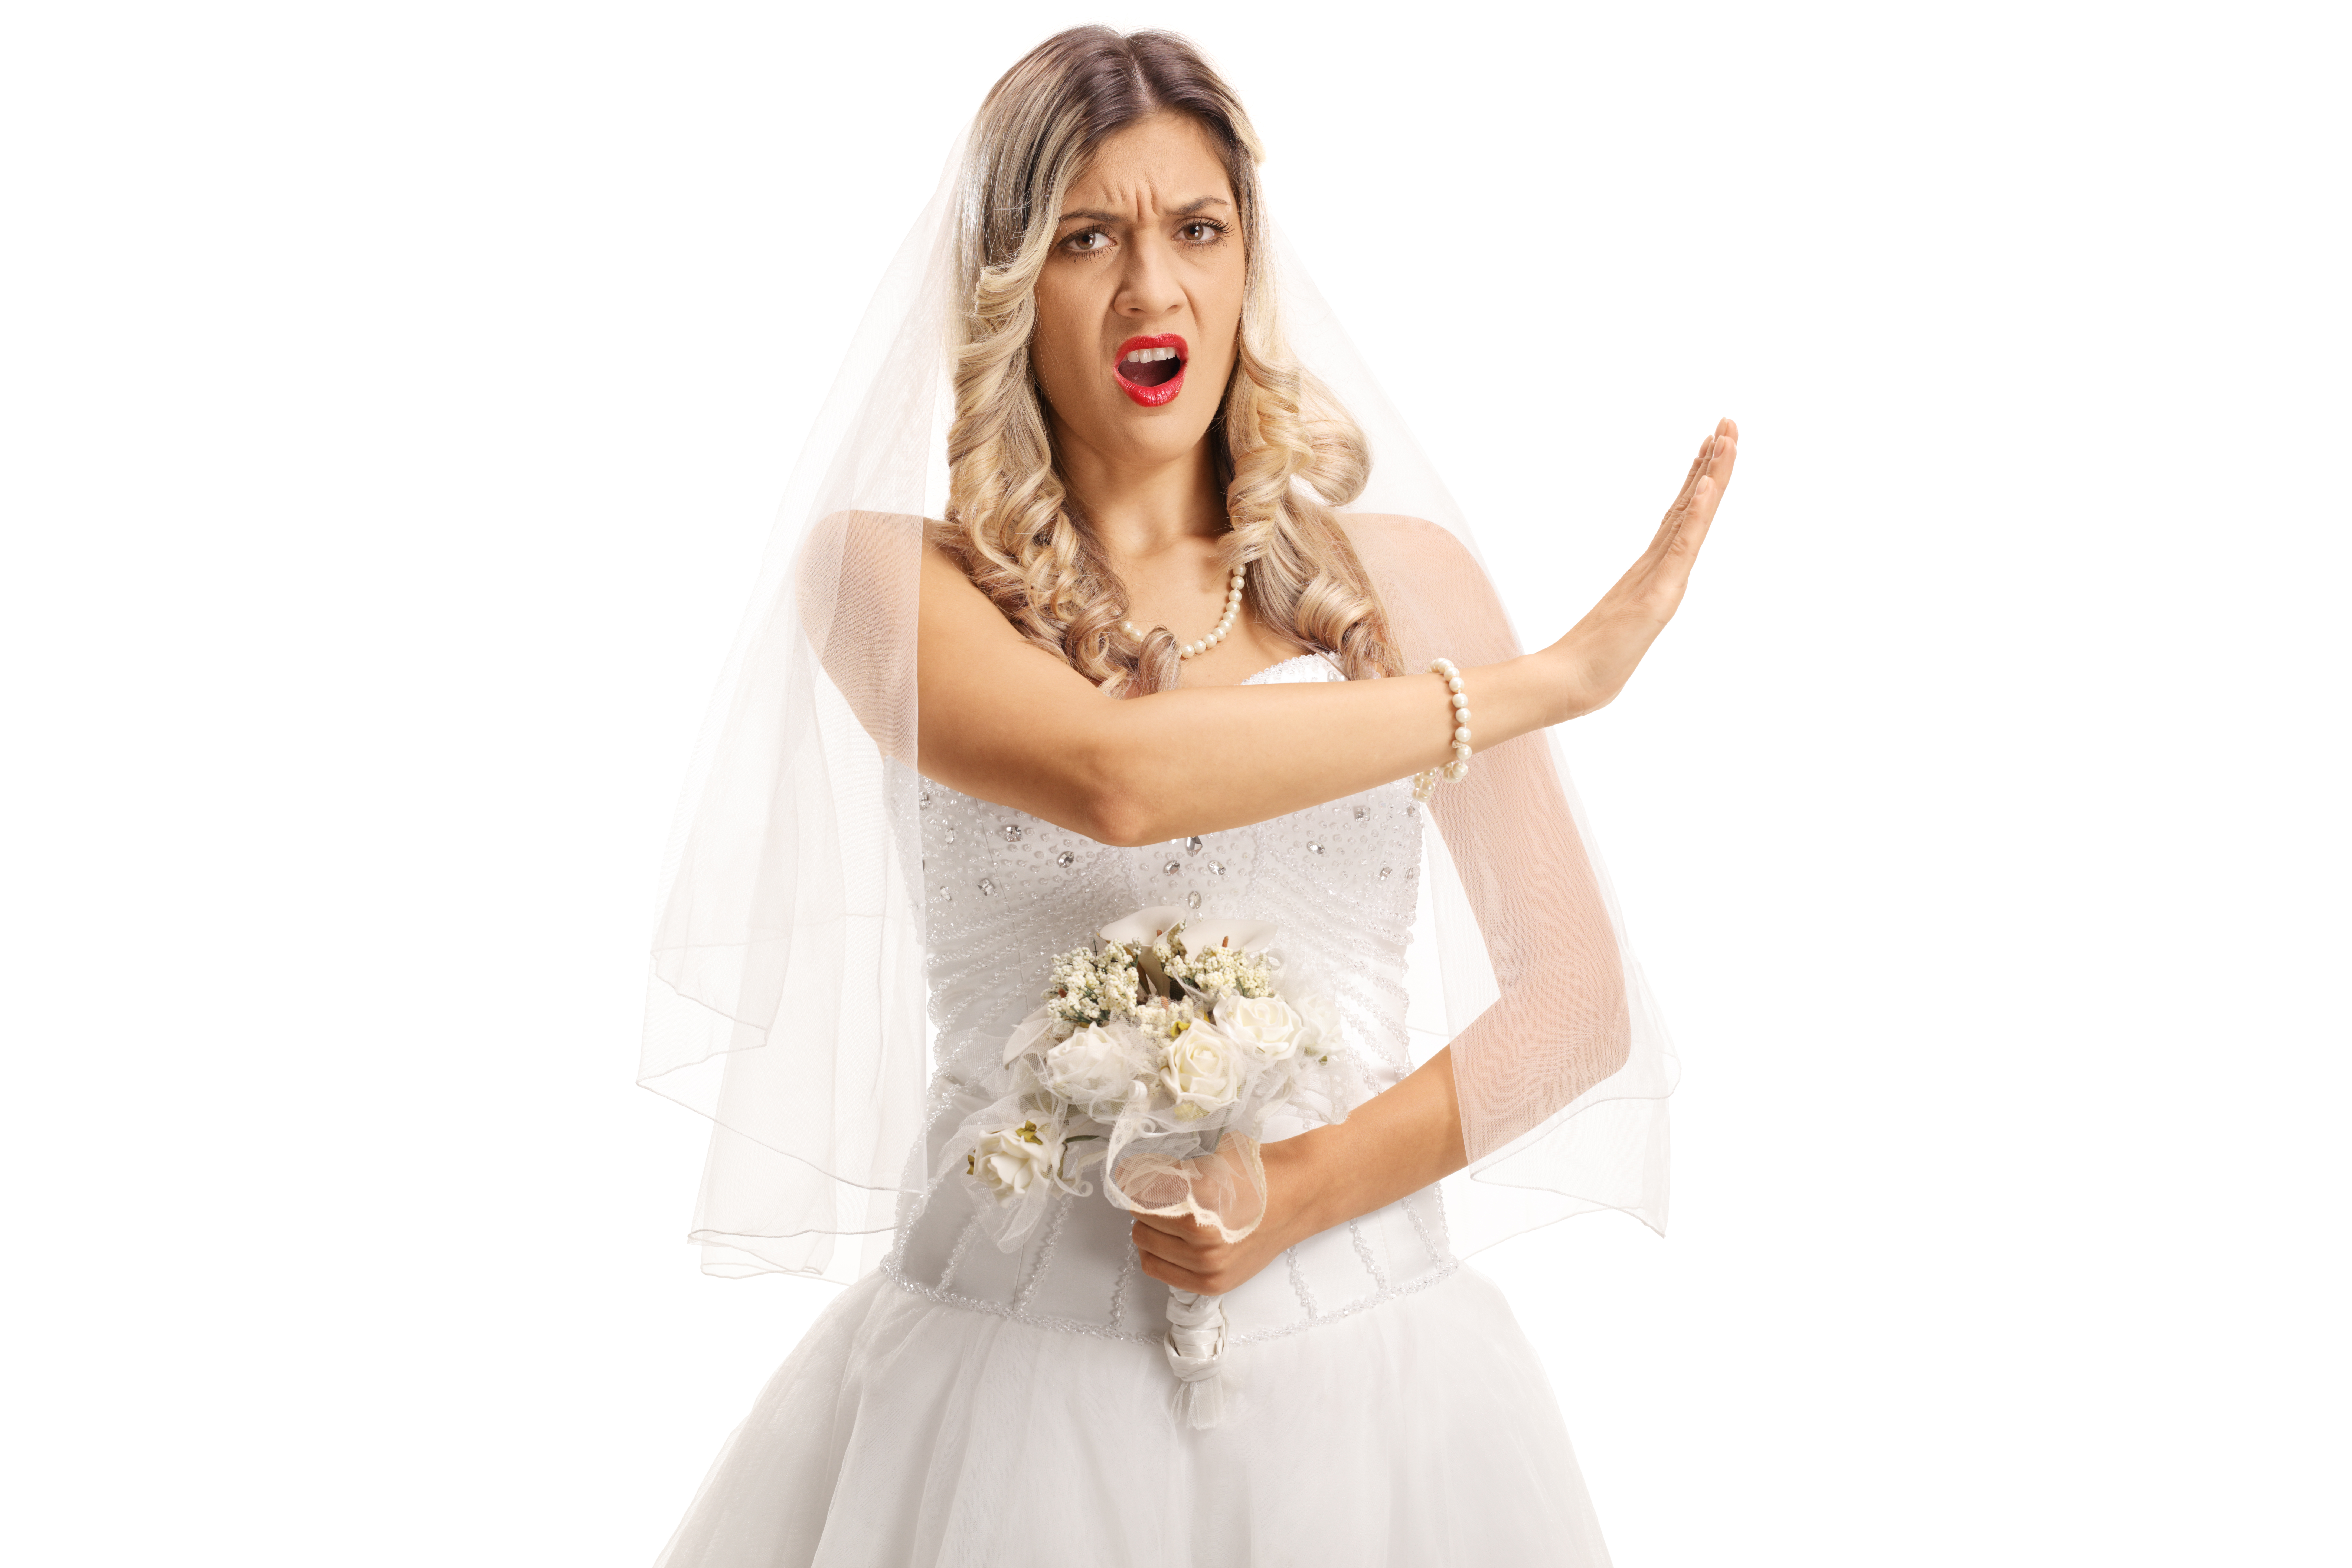 An angry bride putting her hand up to someone outside of the frame | Source: Shutterstock